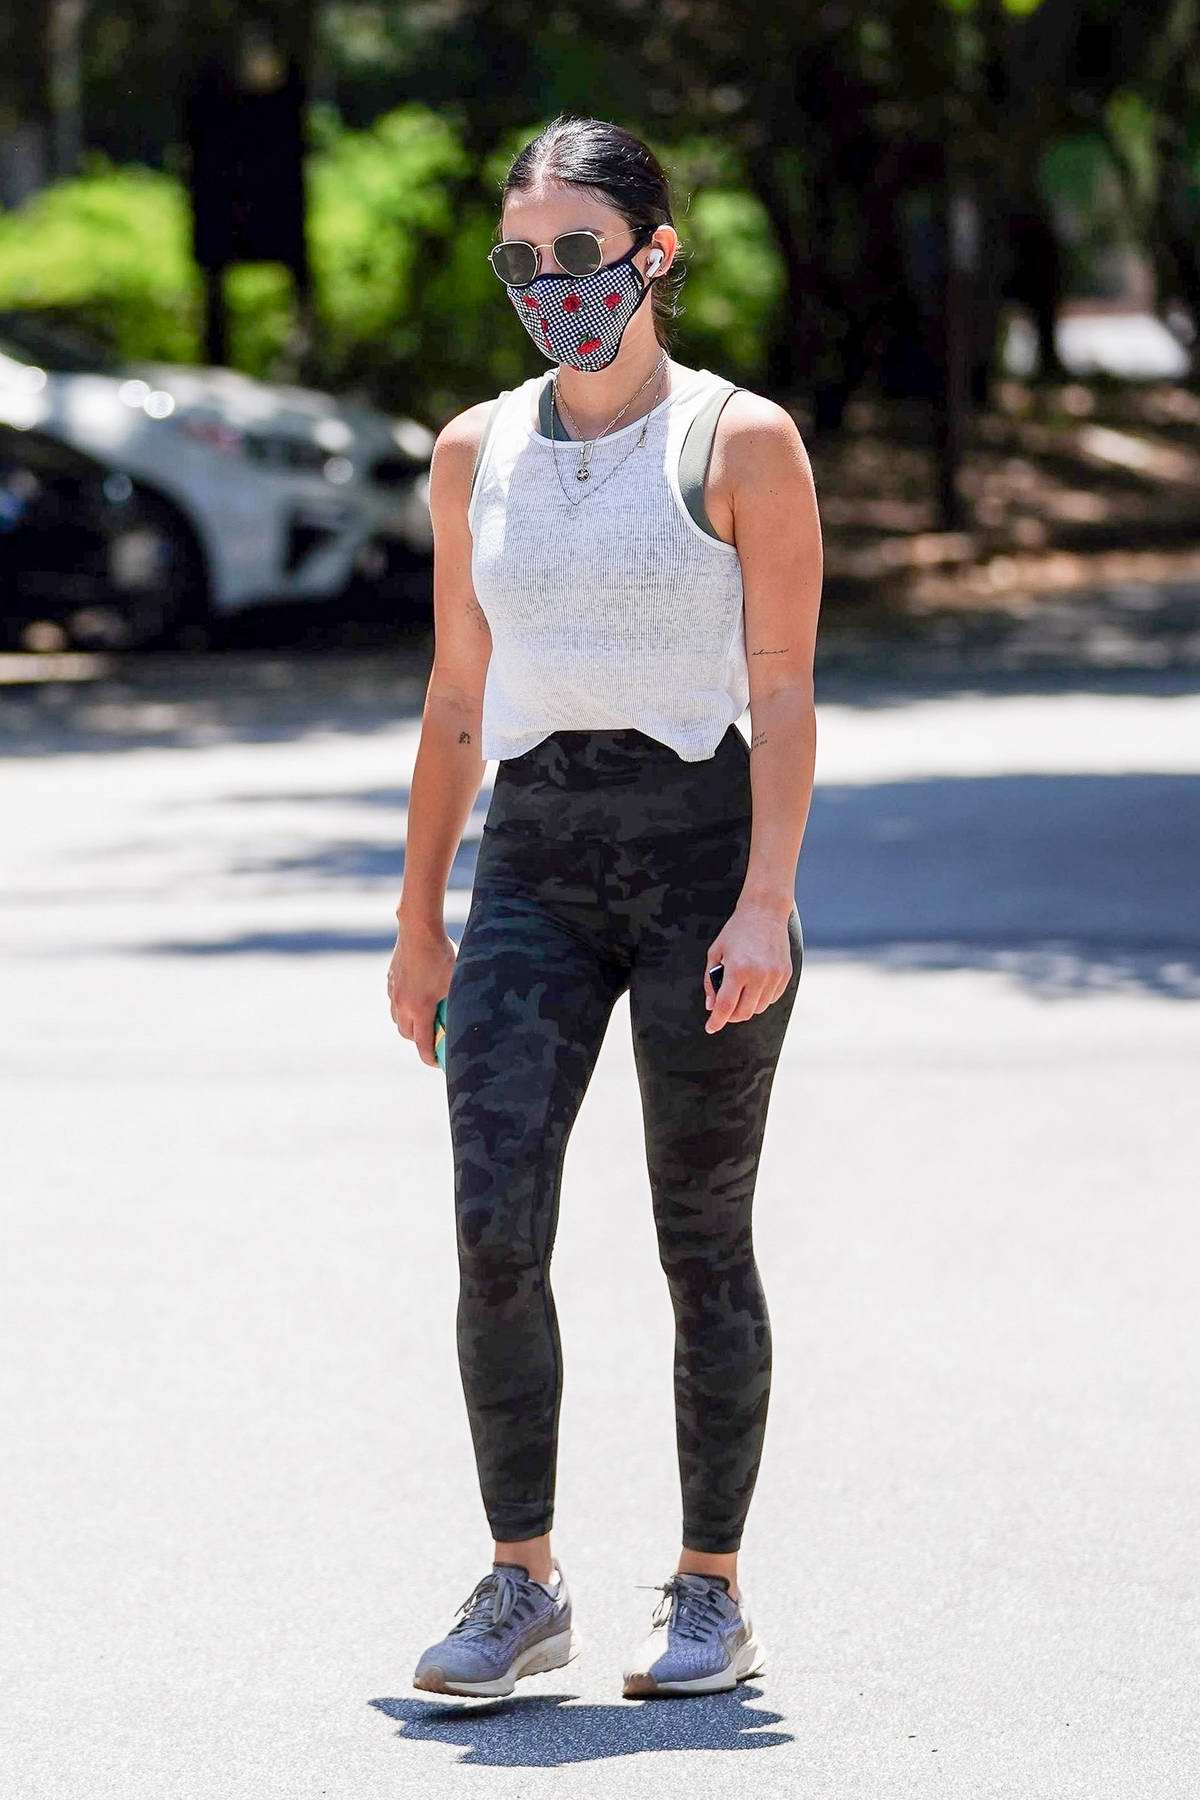 kendall jenner rocks a tank top and leggings while visiting a